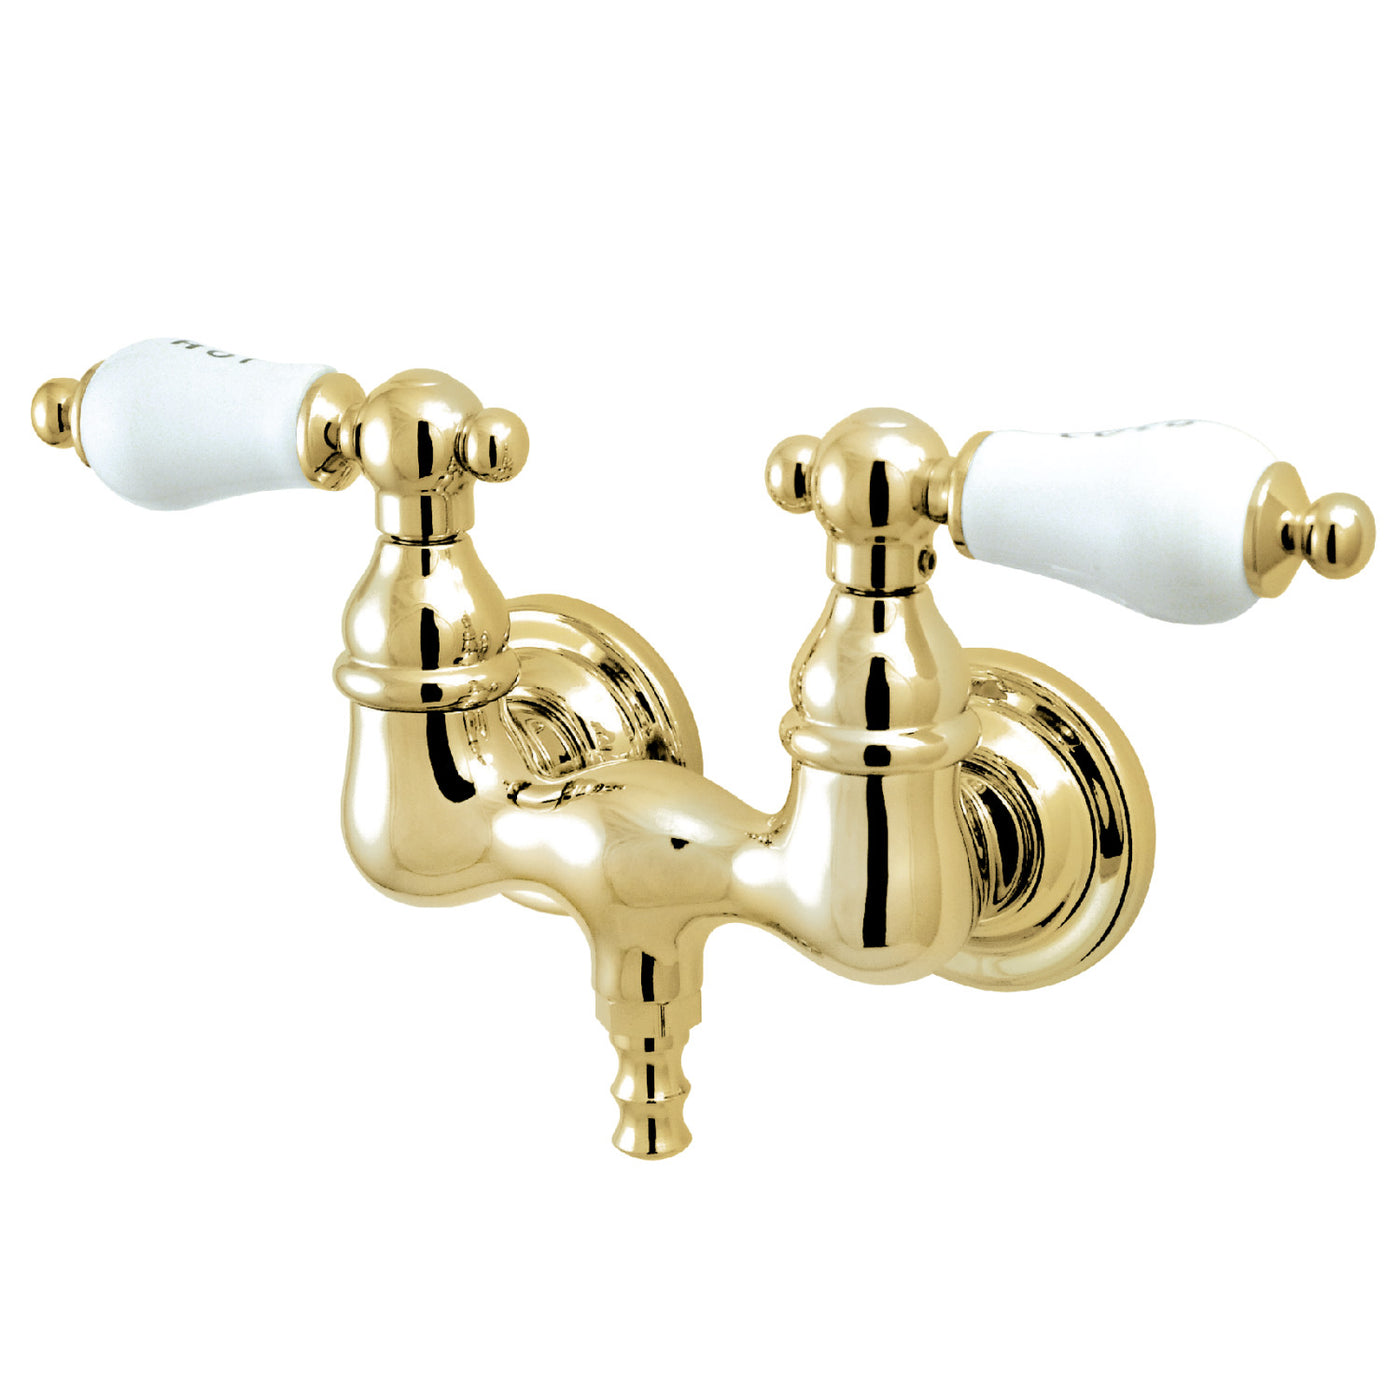 Elements of Design DT0312PL 3-3/8-Inch Wall Mount Tub Faucet, Polished Brass